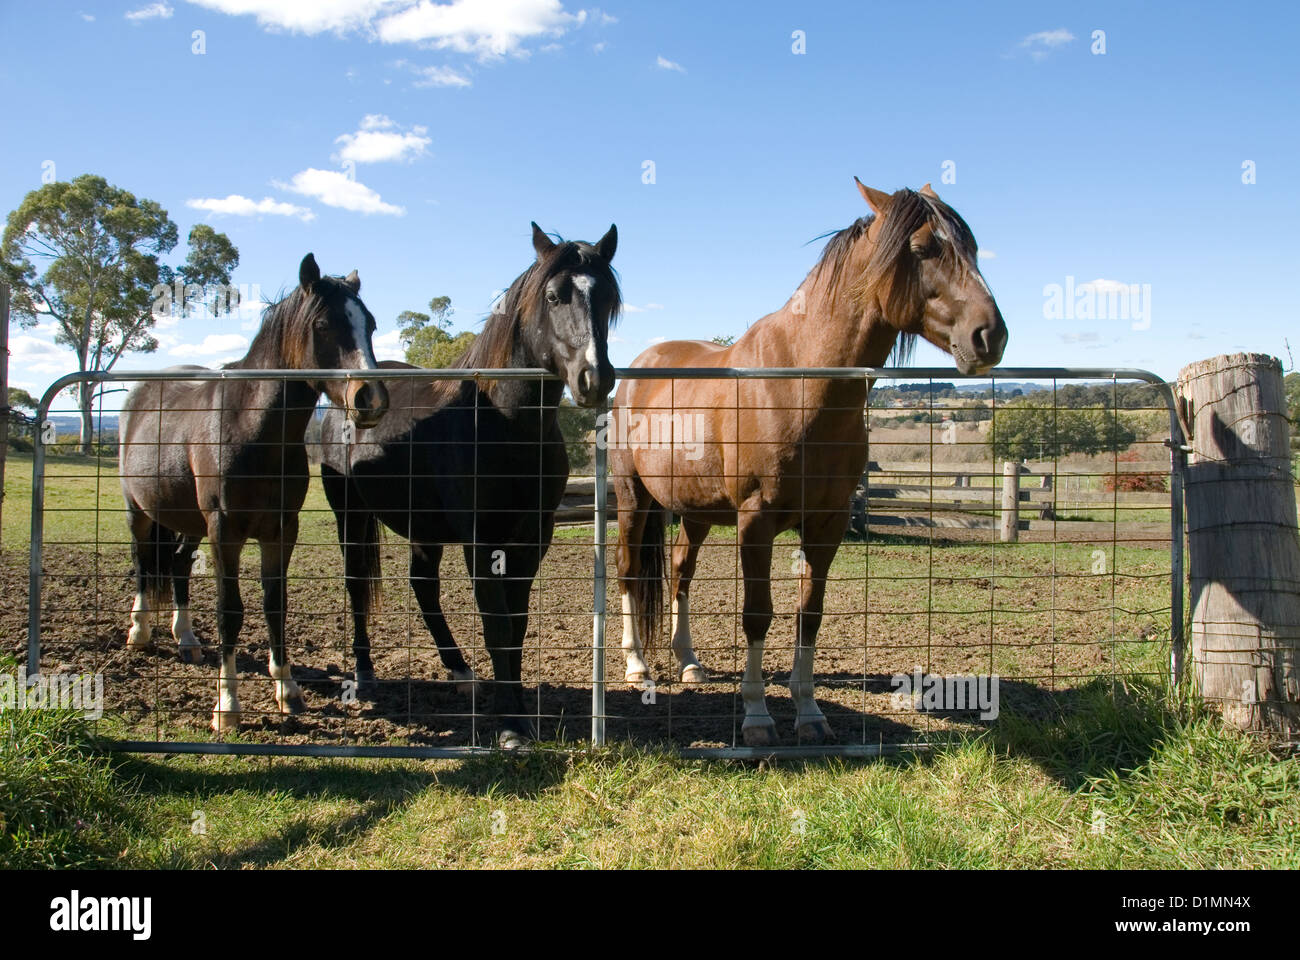 Three horses standing near a gate on a country farm Stock Photo